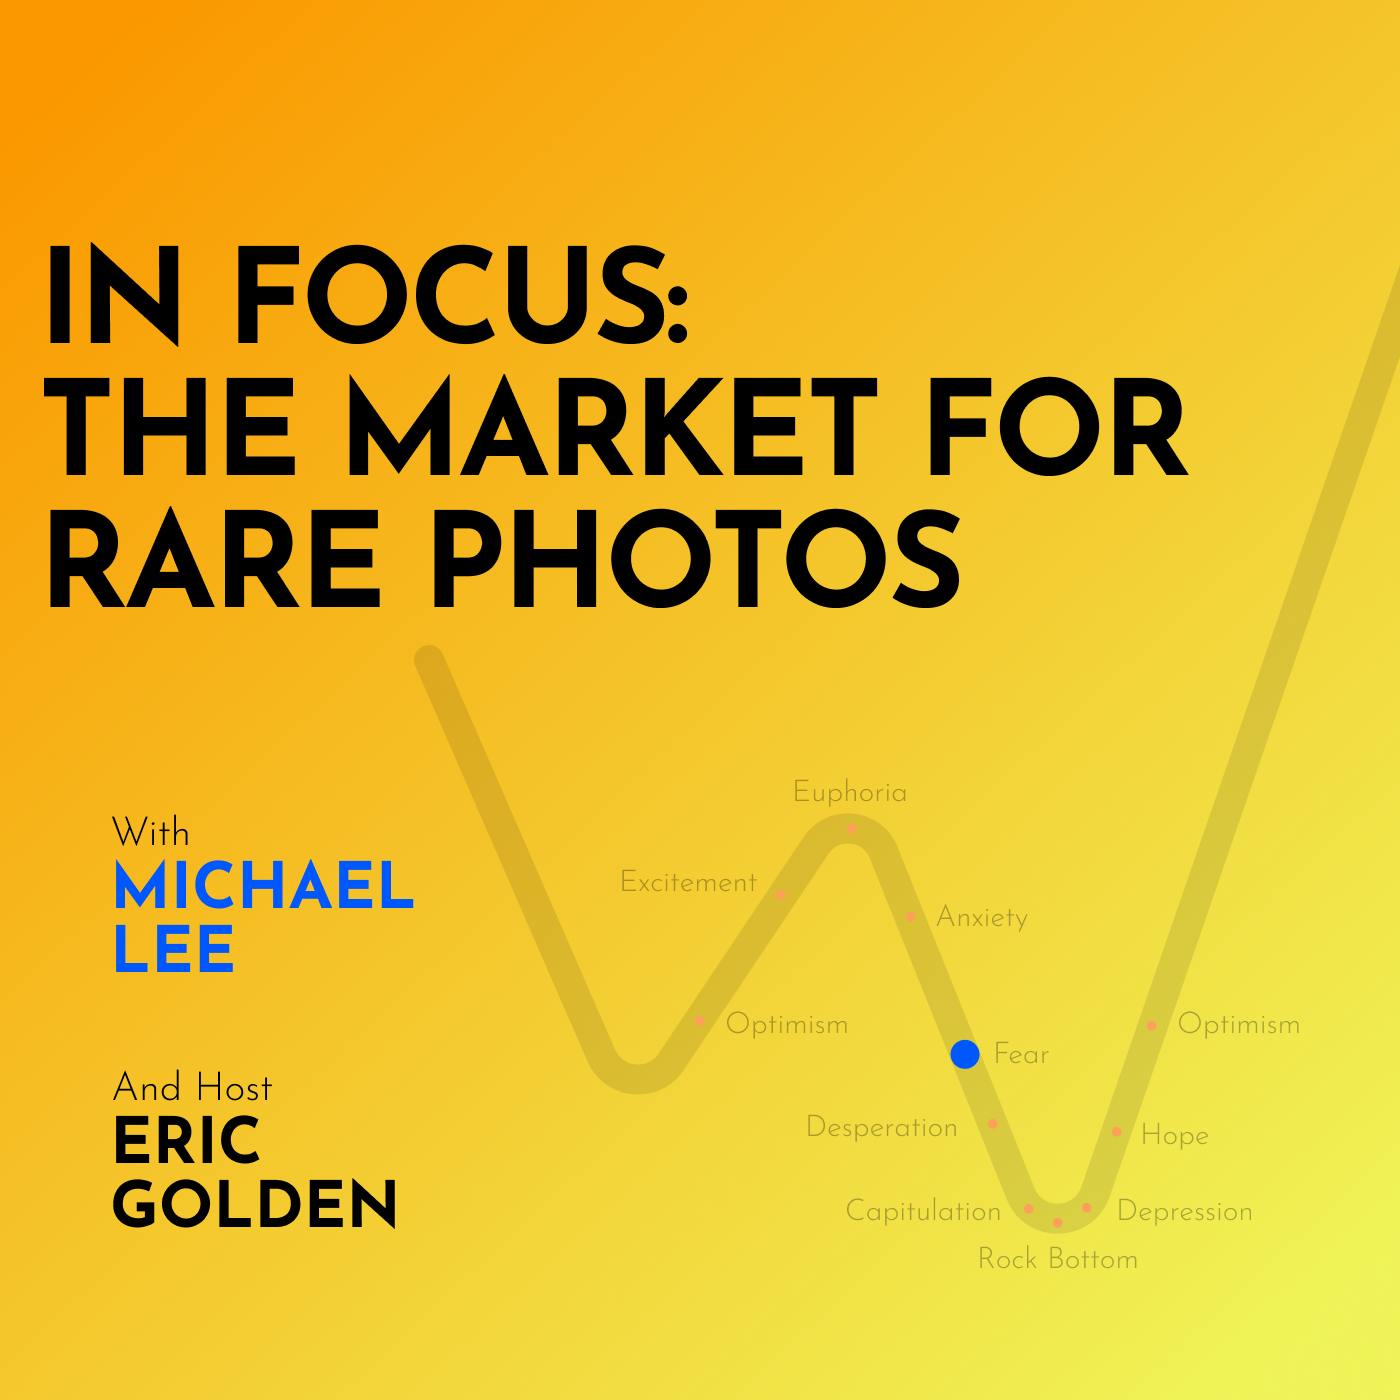 Michael Lee - In Focus: The Market for Rare Photos - [Making Markets, EP.9]